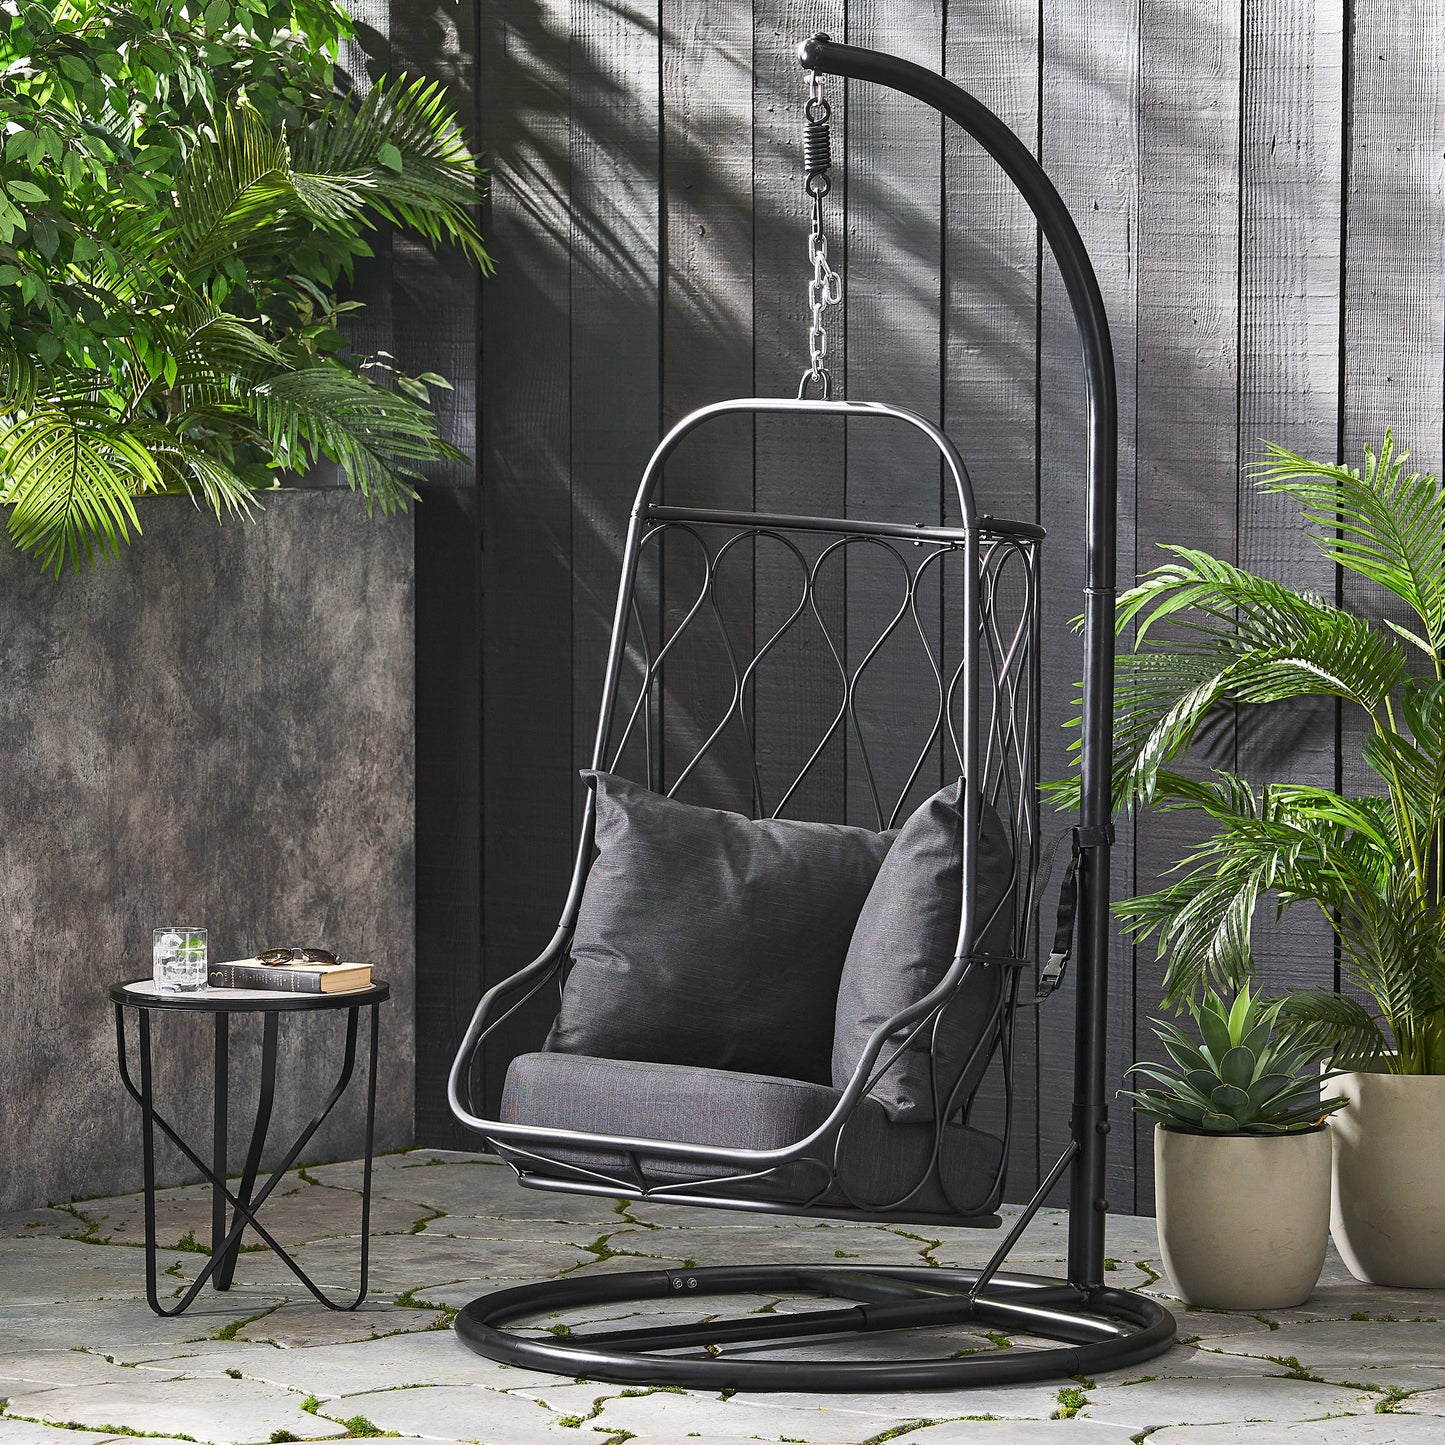 Edgell Indoor/Outdoor Hanging Chair with Stand, Black